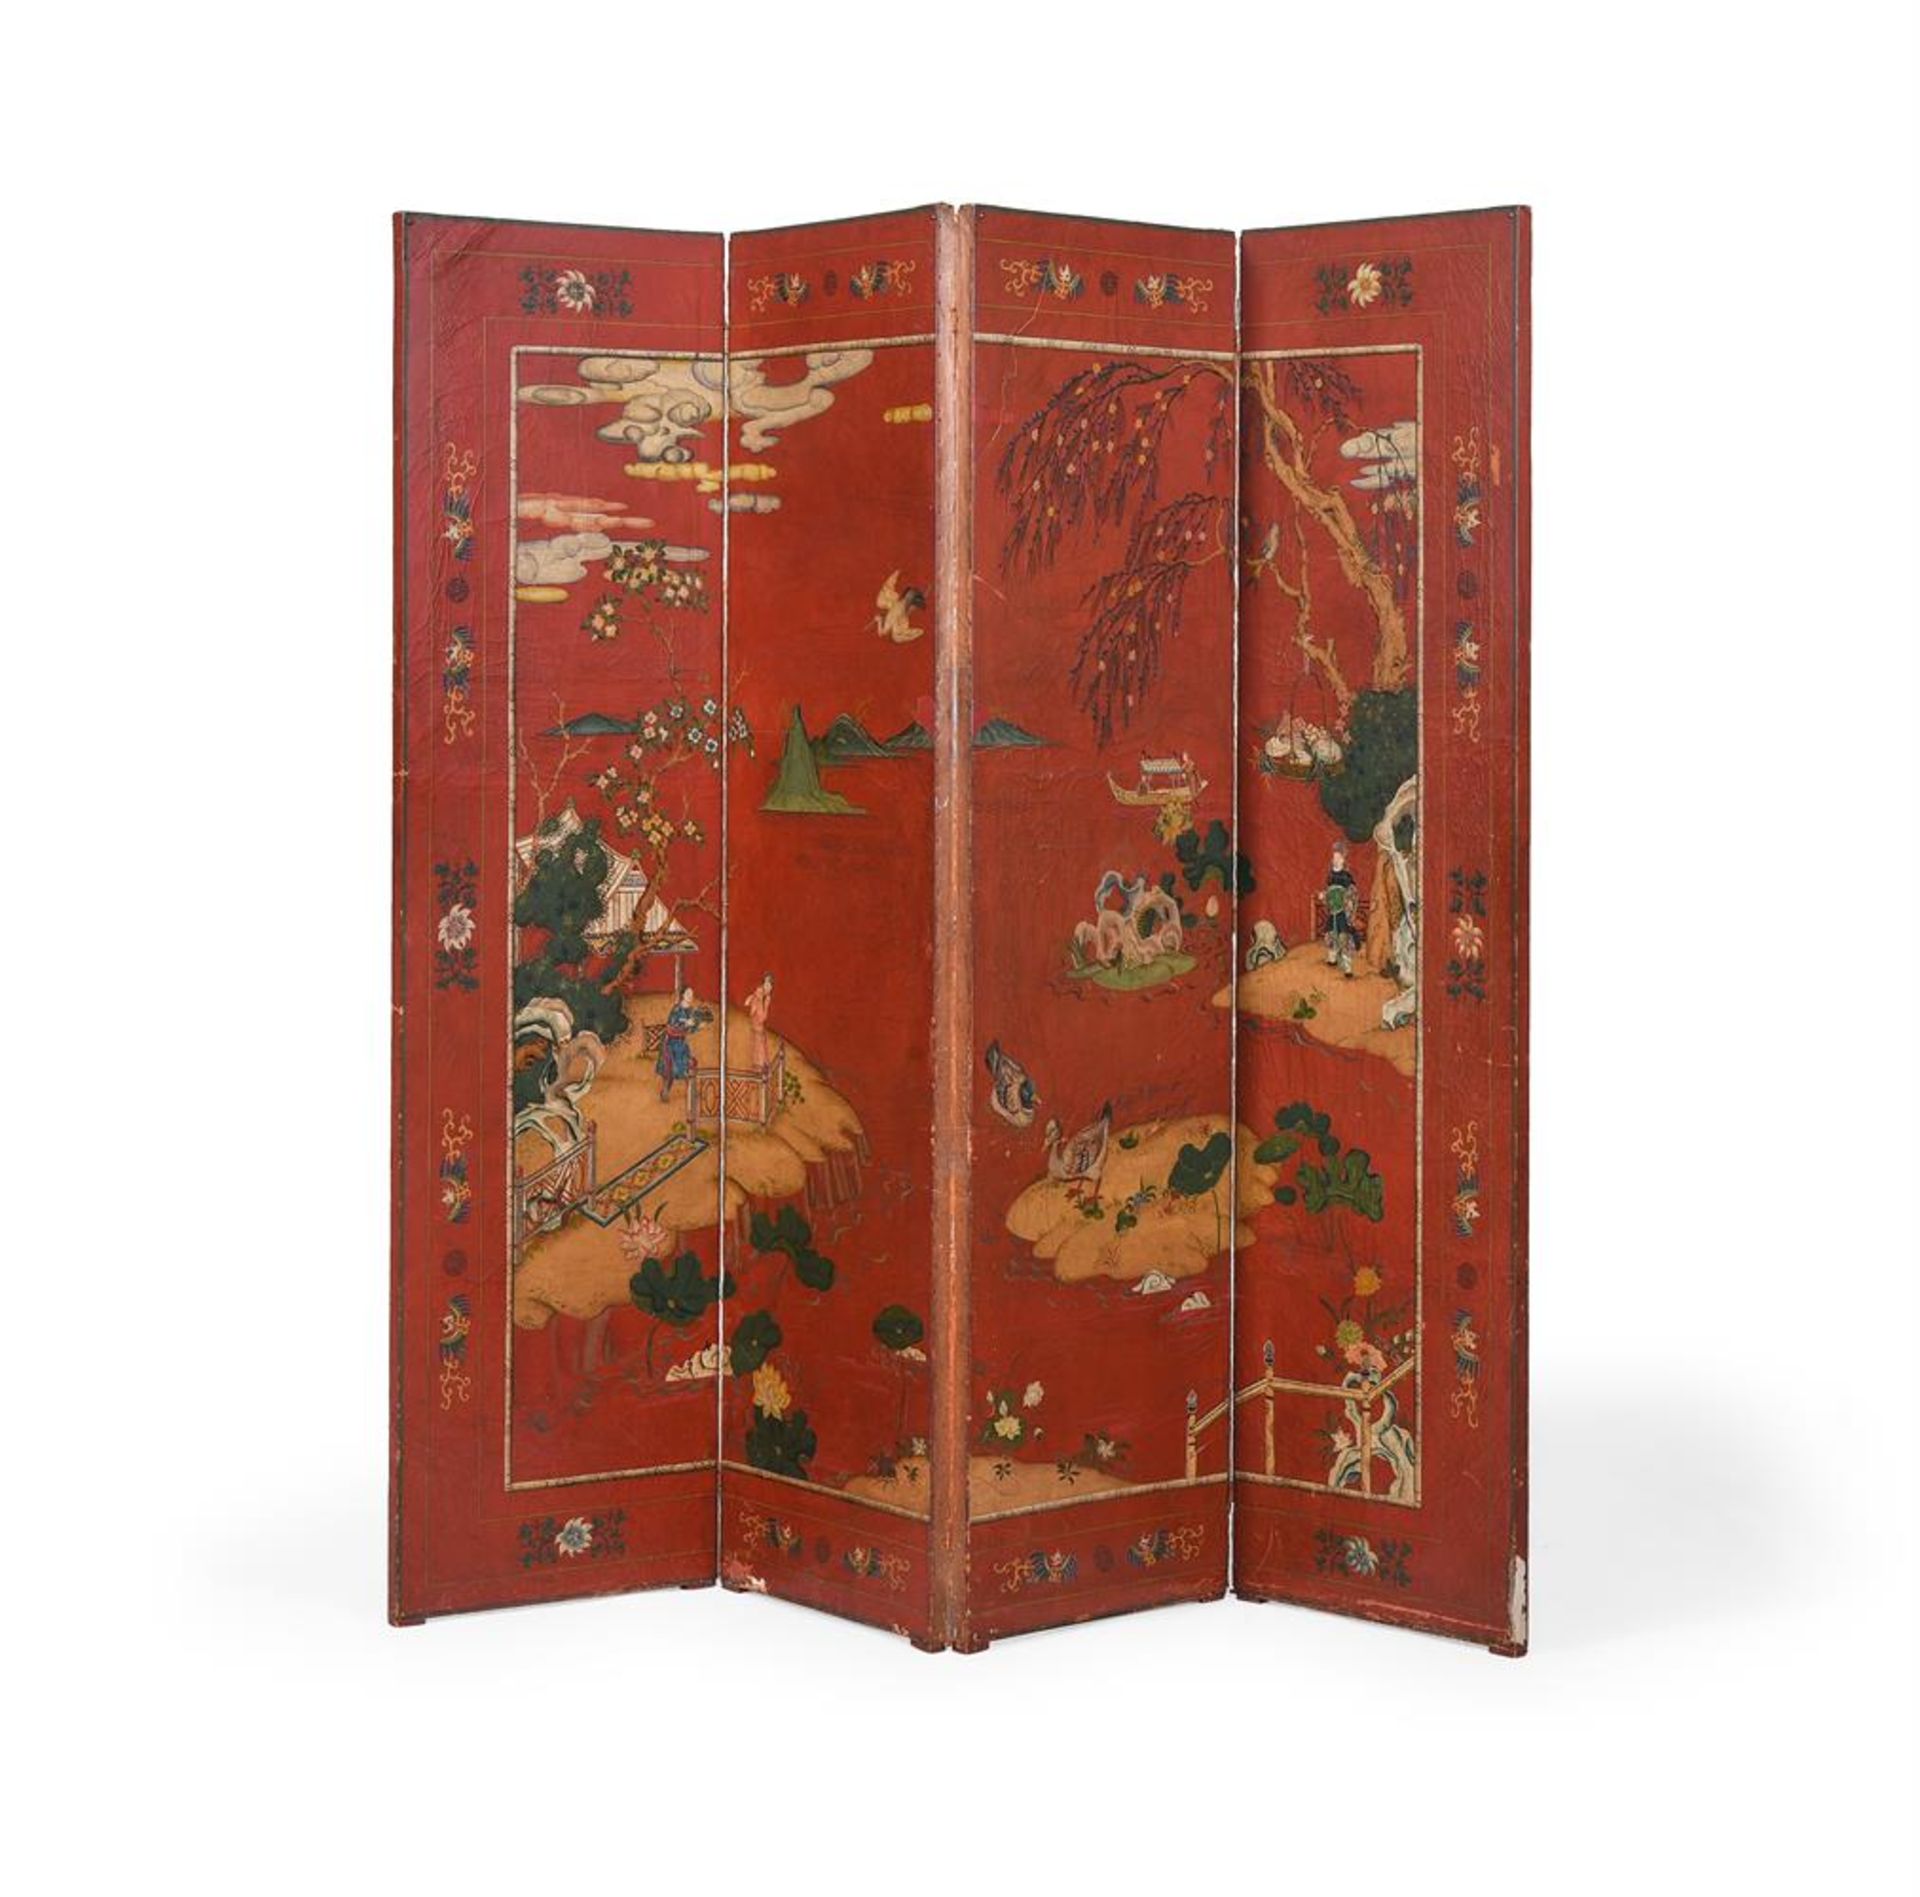 A SCARLET LACQUER AND GILT CHINOISERIE DECORATED FOUR-FOLD ROOM SCREEN